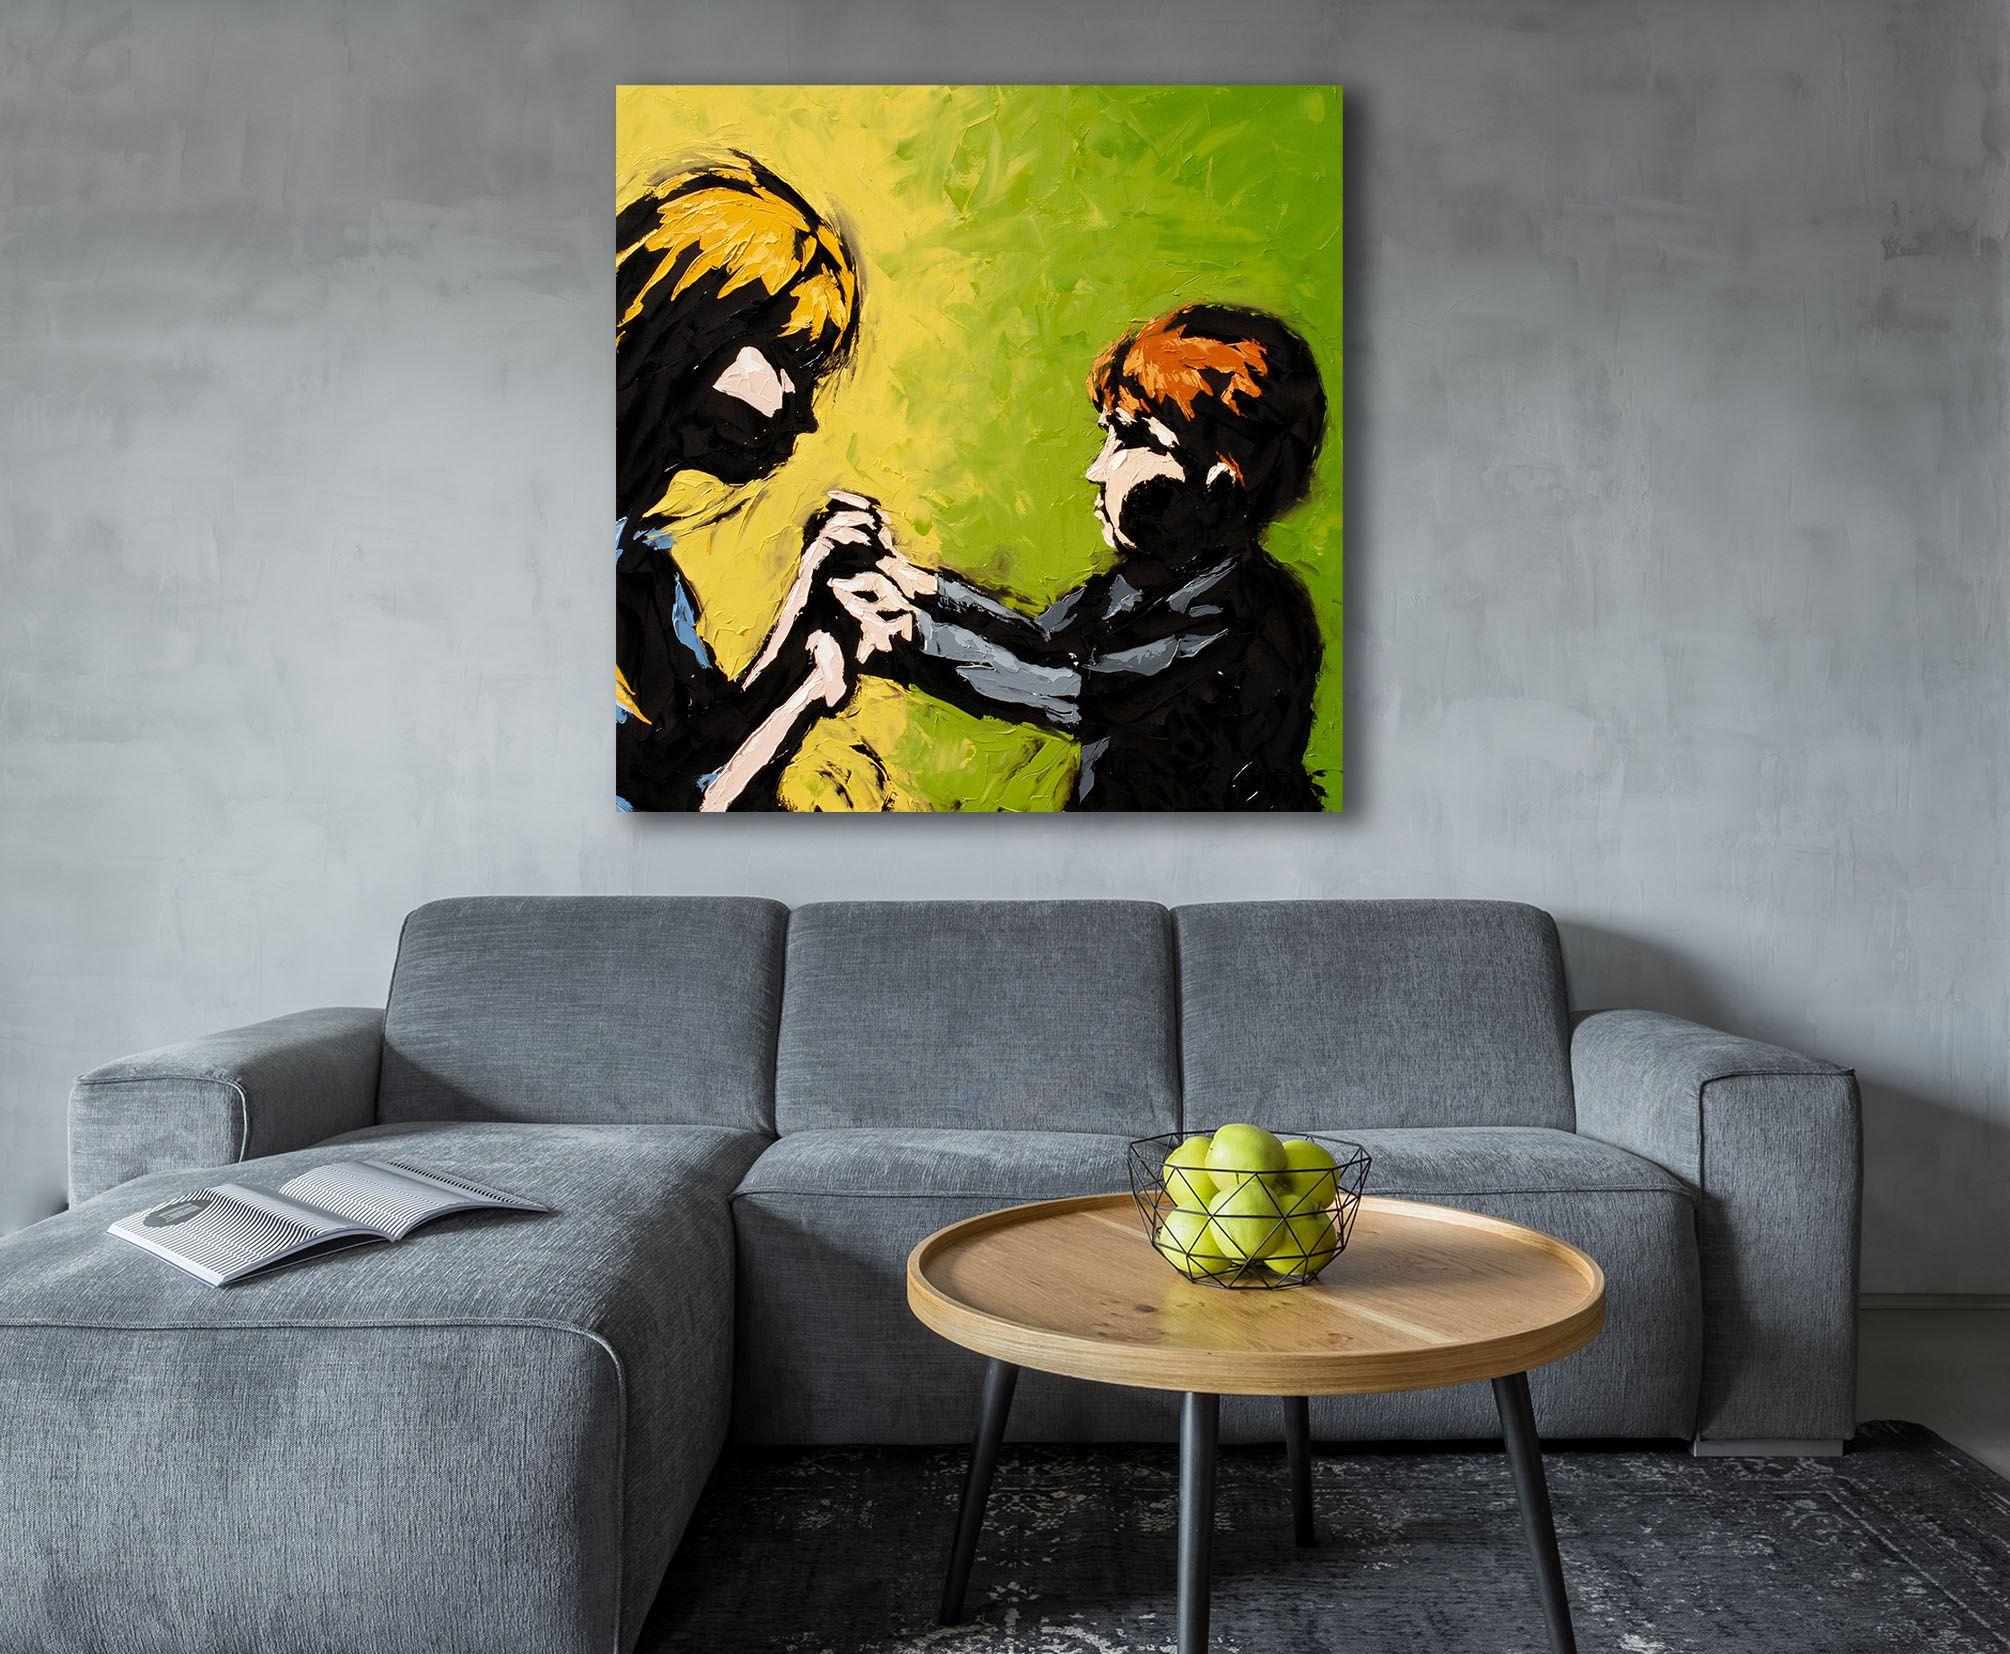 Brother and sister, together as friends, ready to face whatever life sends. - Robert Brault :: Painting :: Abstract Expressionism :: This piece comes with an official certificate of authenticity signed by the artist :: Ready to Hang: Yes :: Signed: